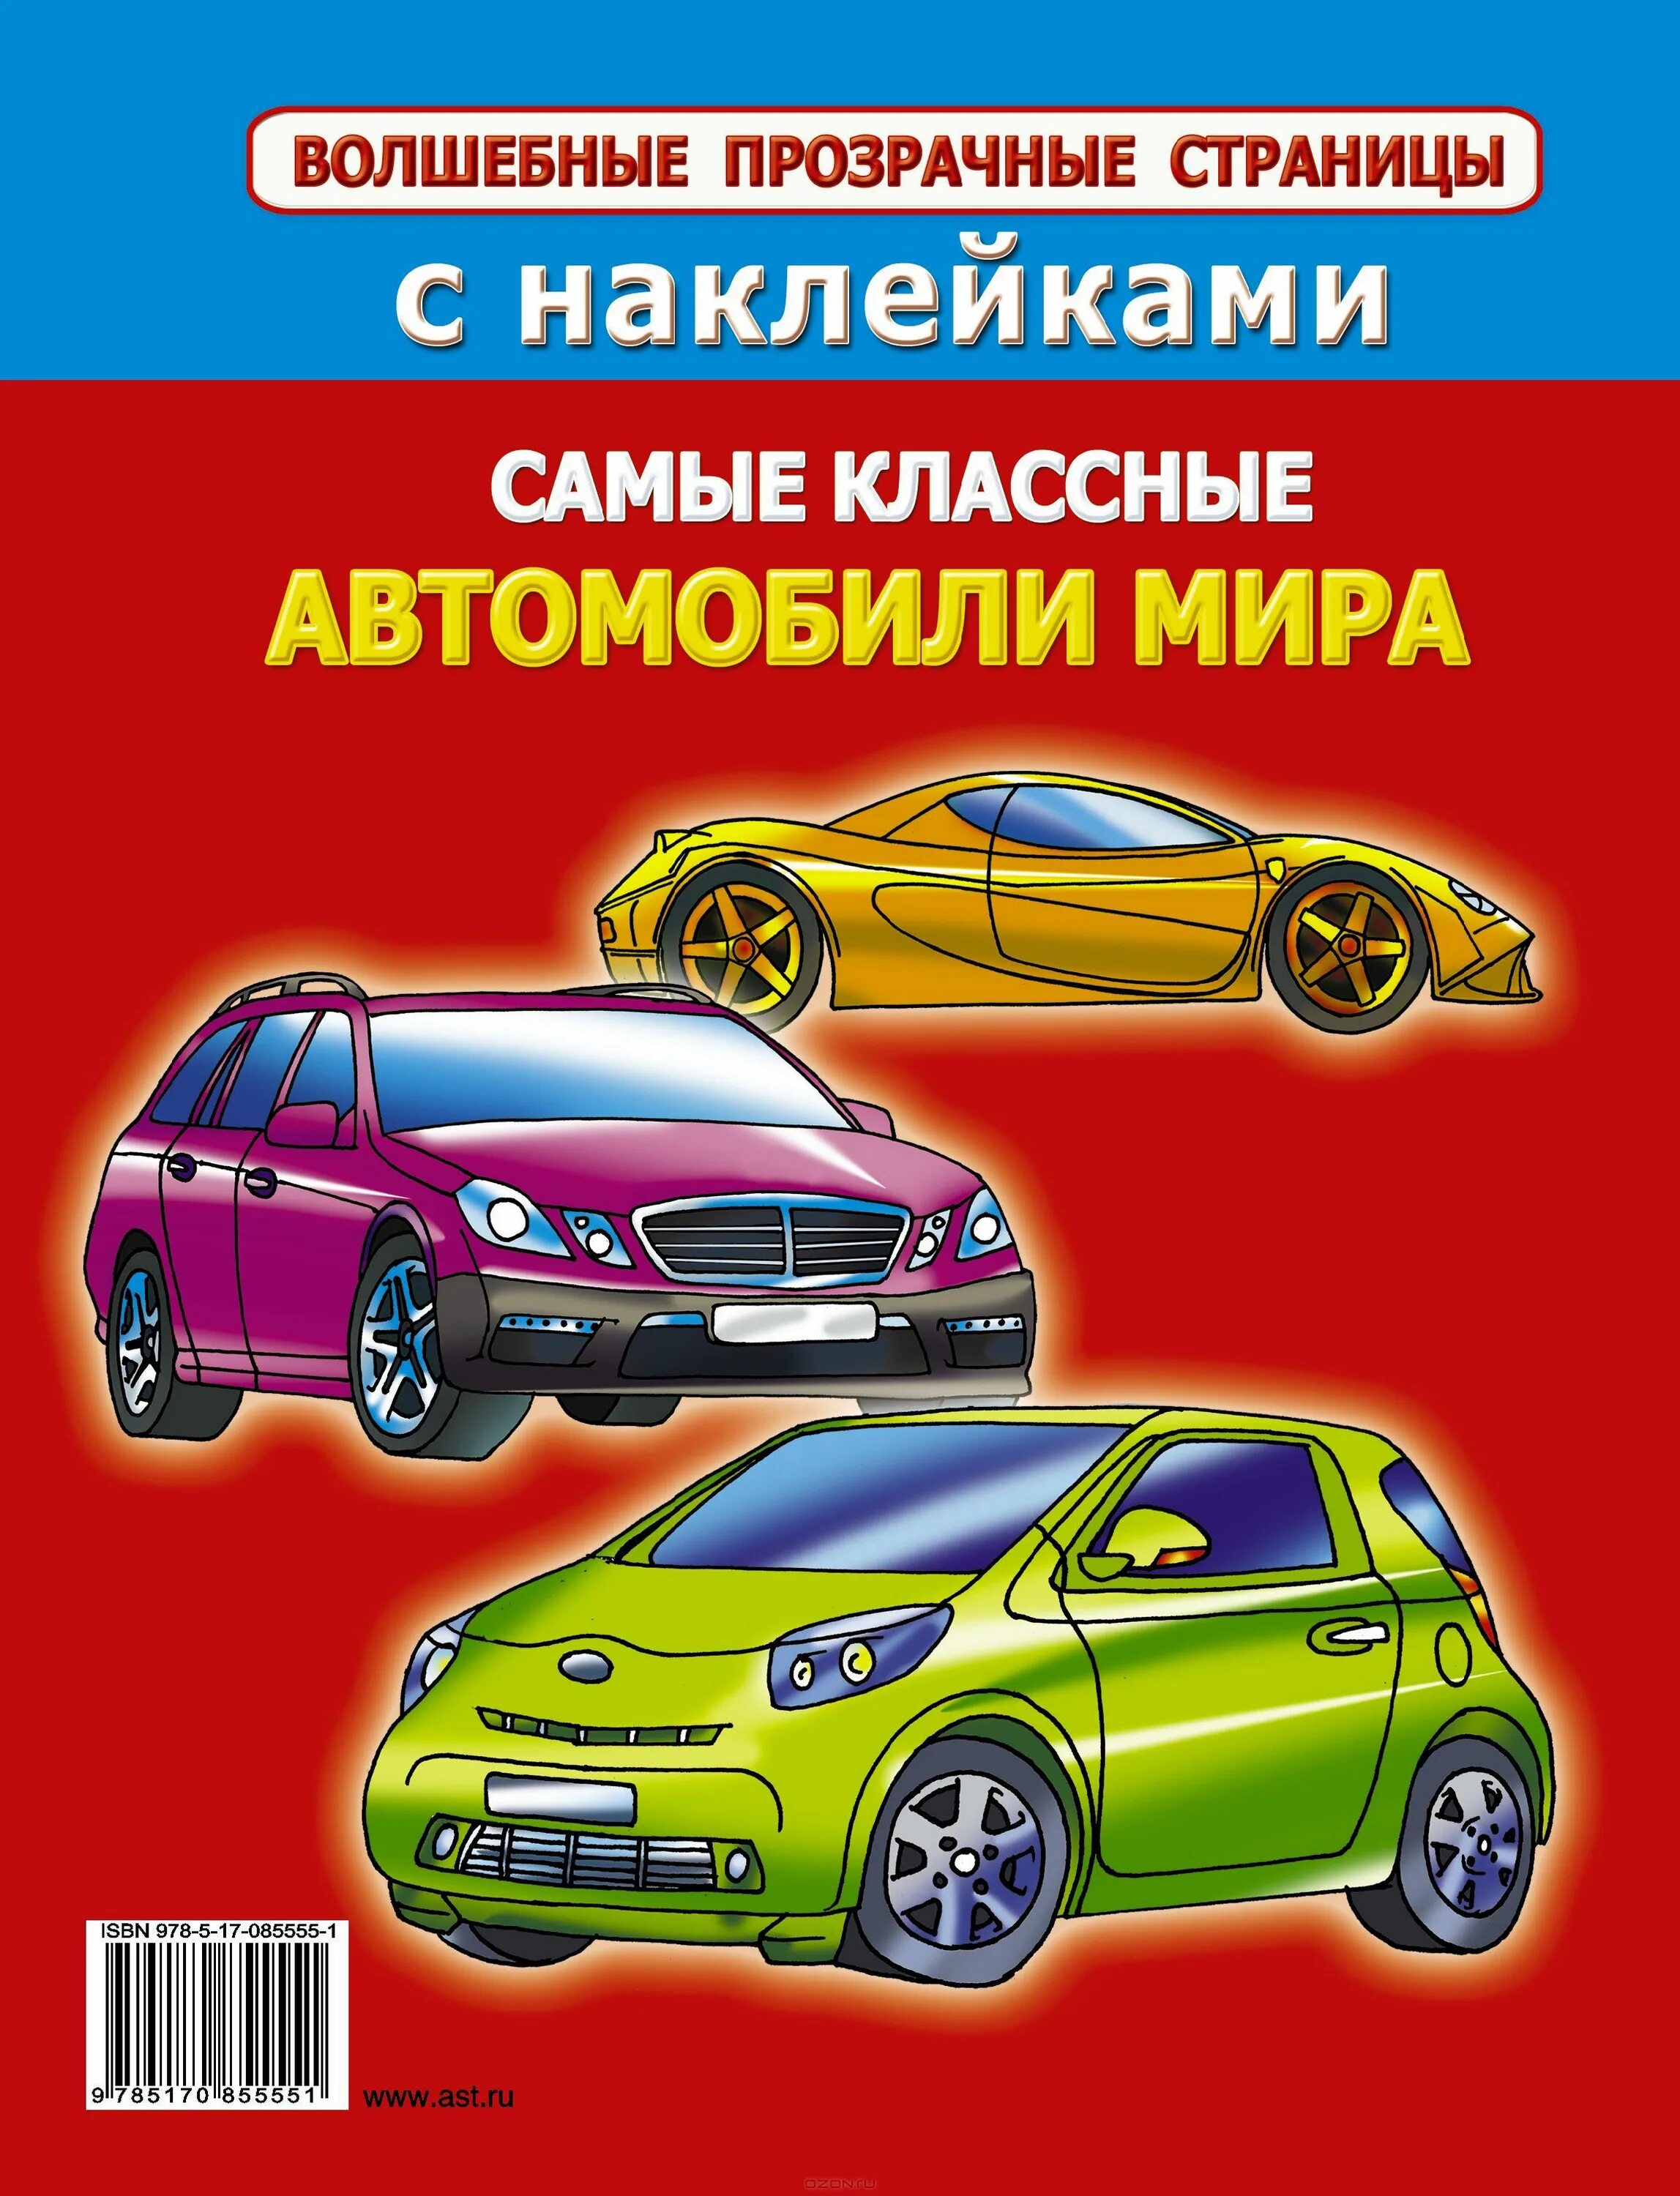 A fascinating order cars of the world ismatullayev